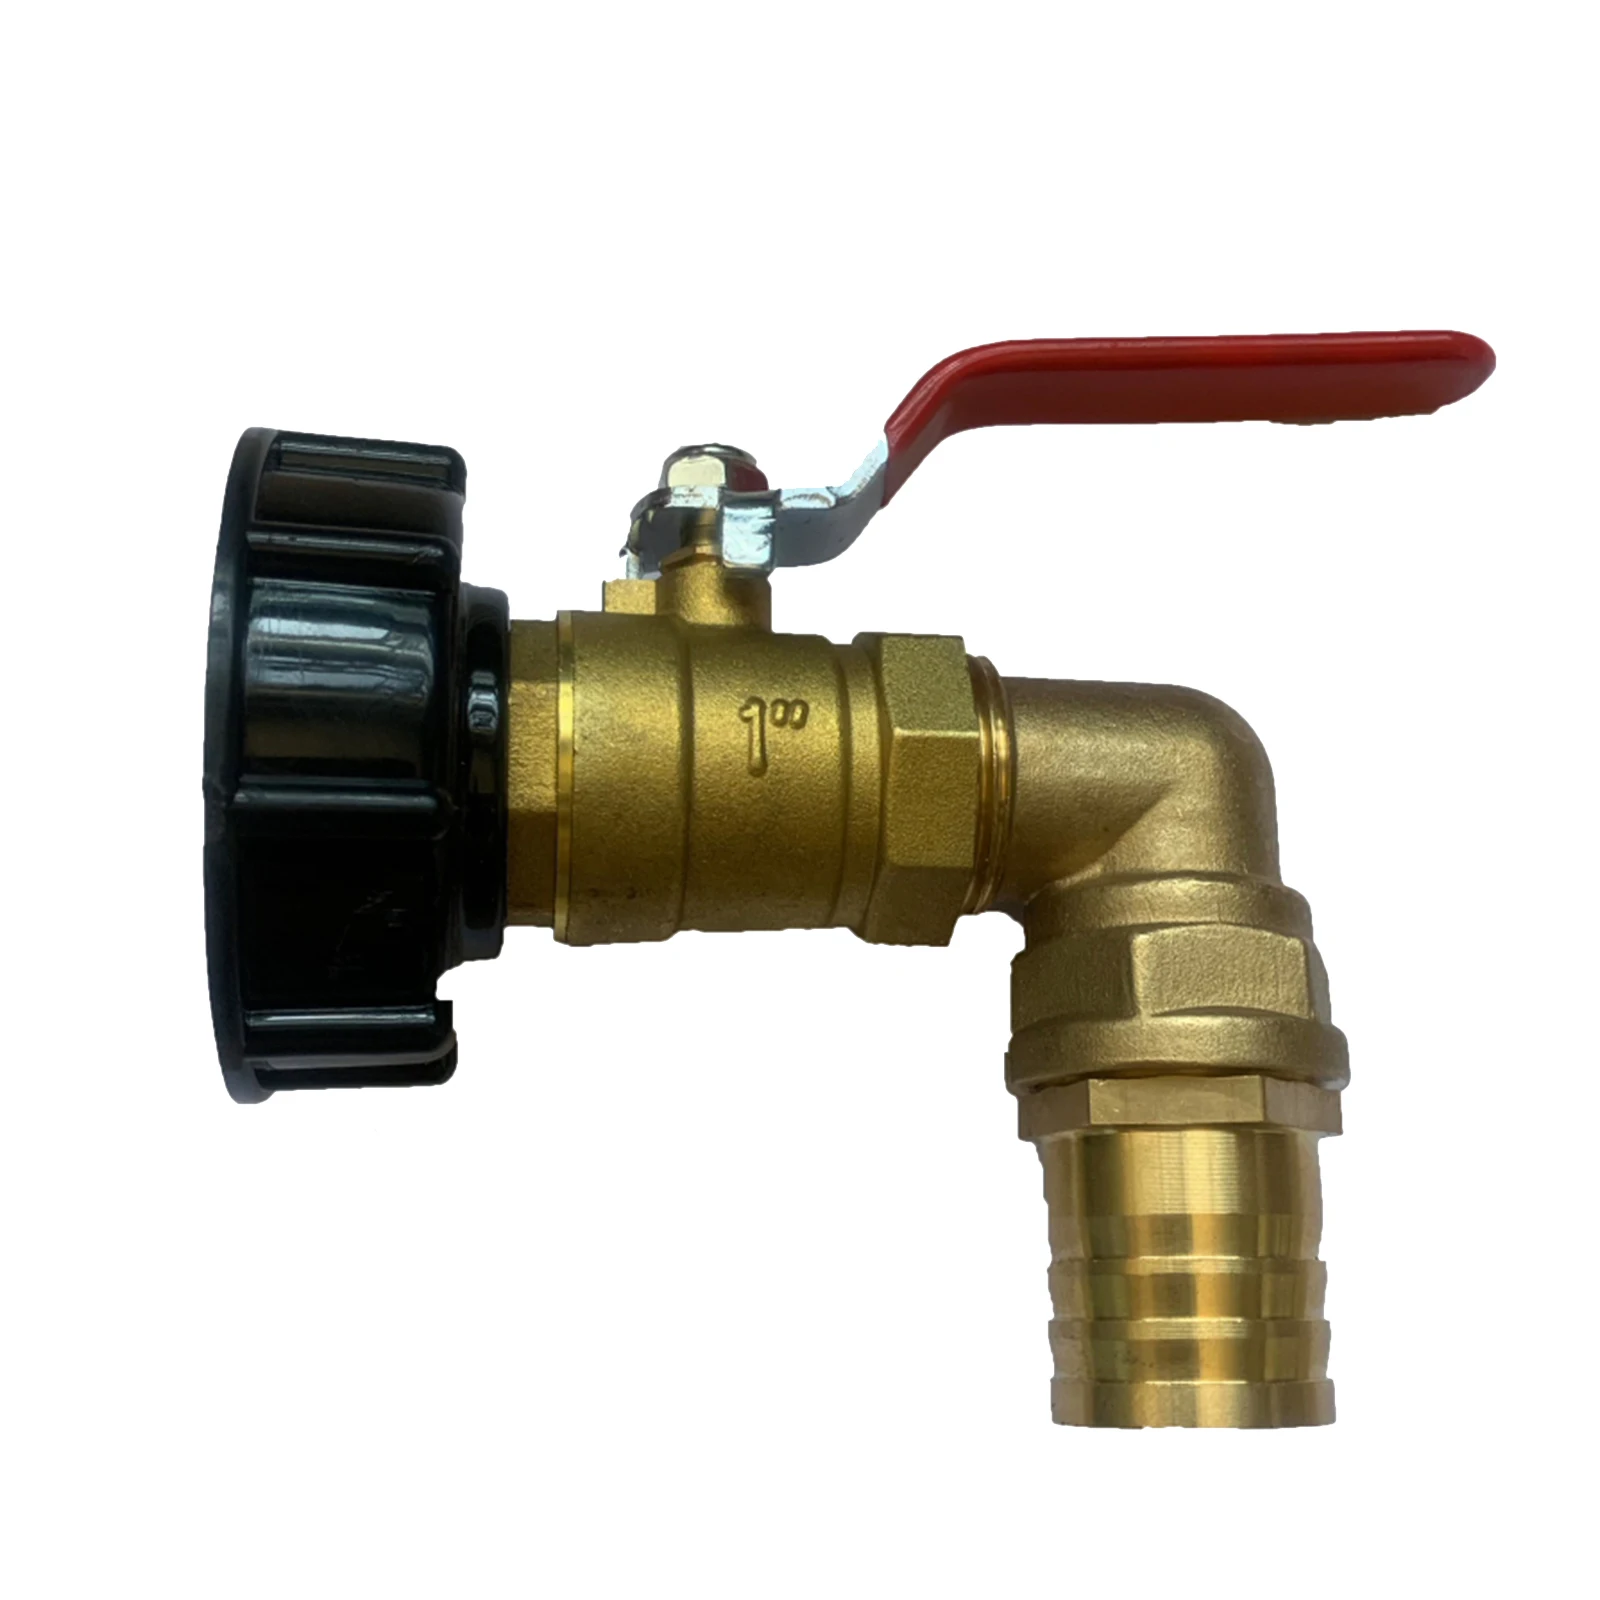 IBC Water Tank Outlet Fitting/ Connector/ Adapter Brass with Range of Tap Valve 